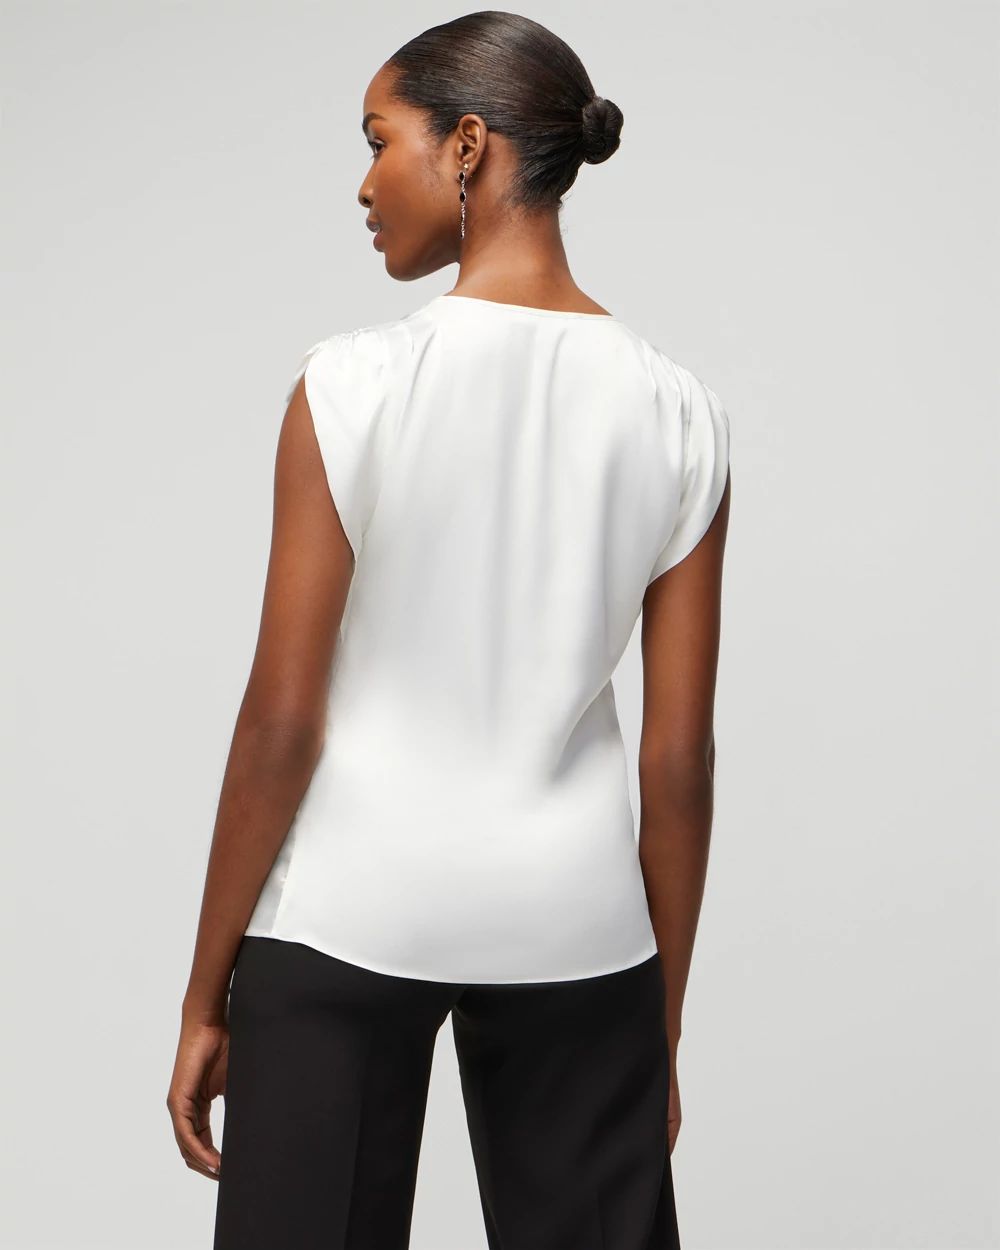 Sleeveless V-neck Ruched Shoulder Shell Top click to view larger image.